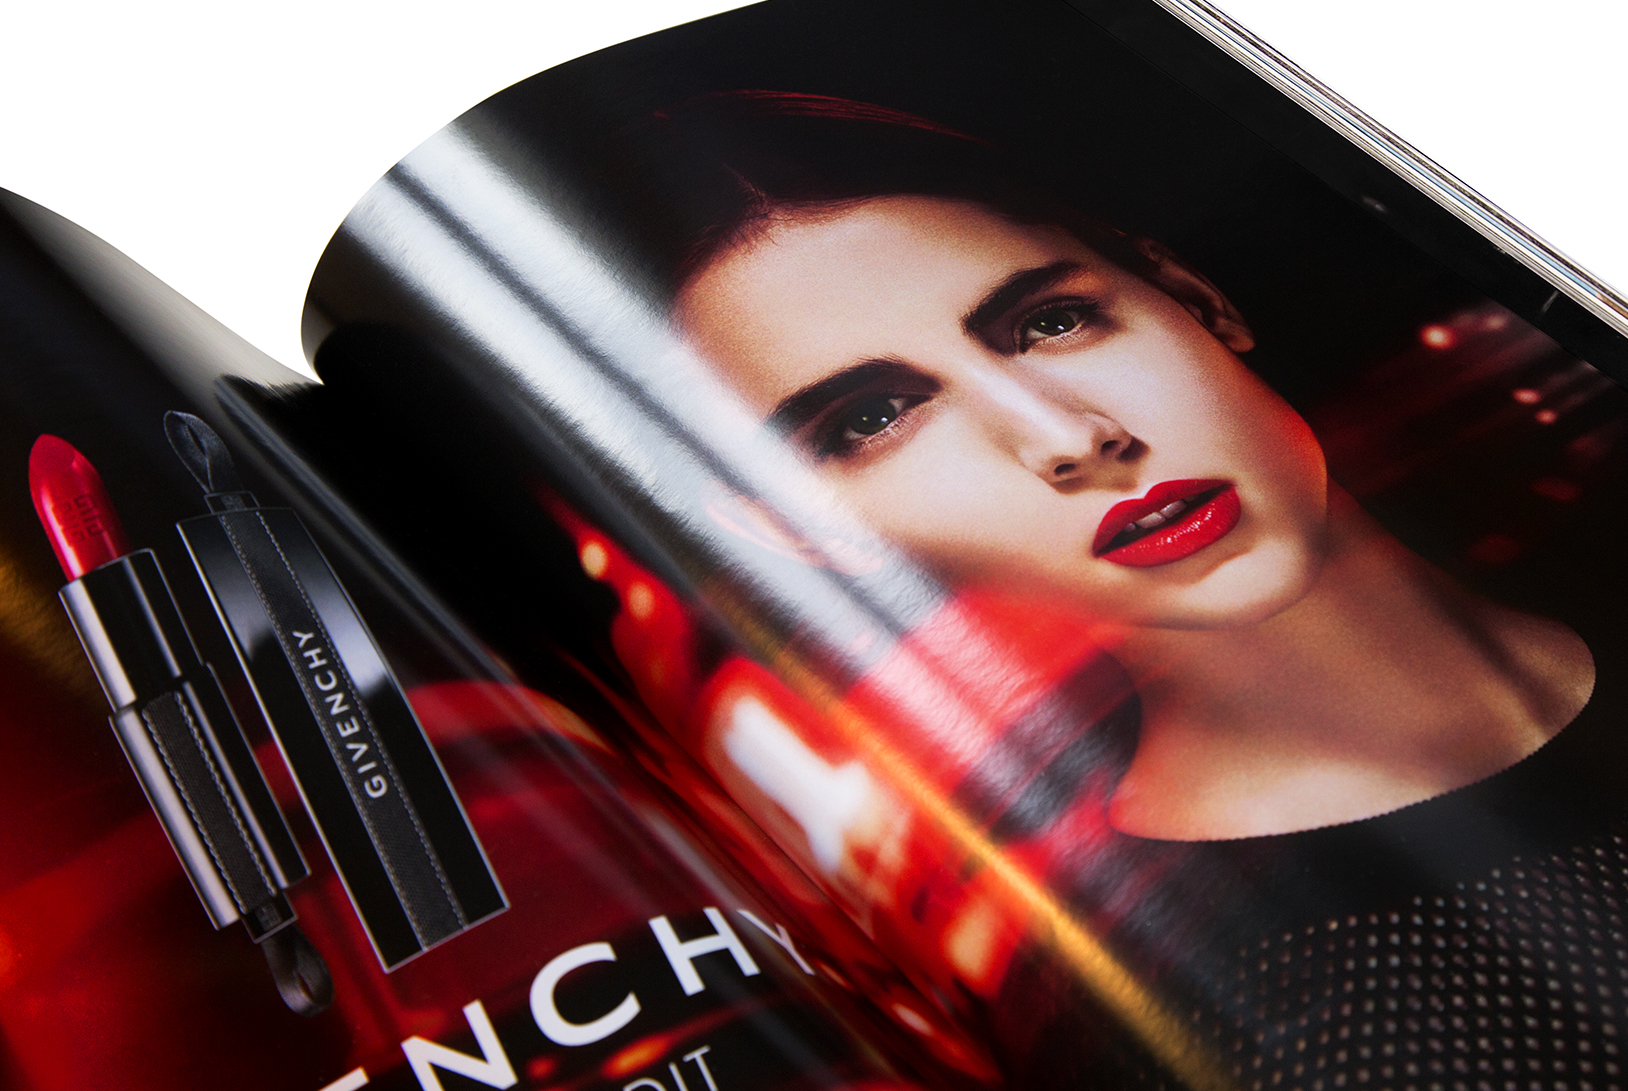 CARLA COSTE / Art Director + Image Maker GIVENCHY – Rouge Interdit